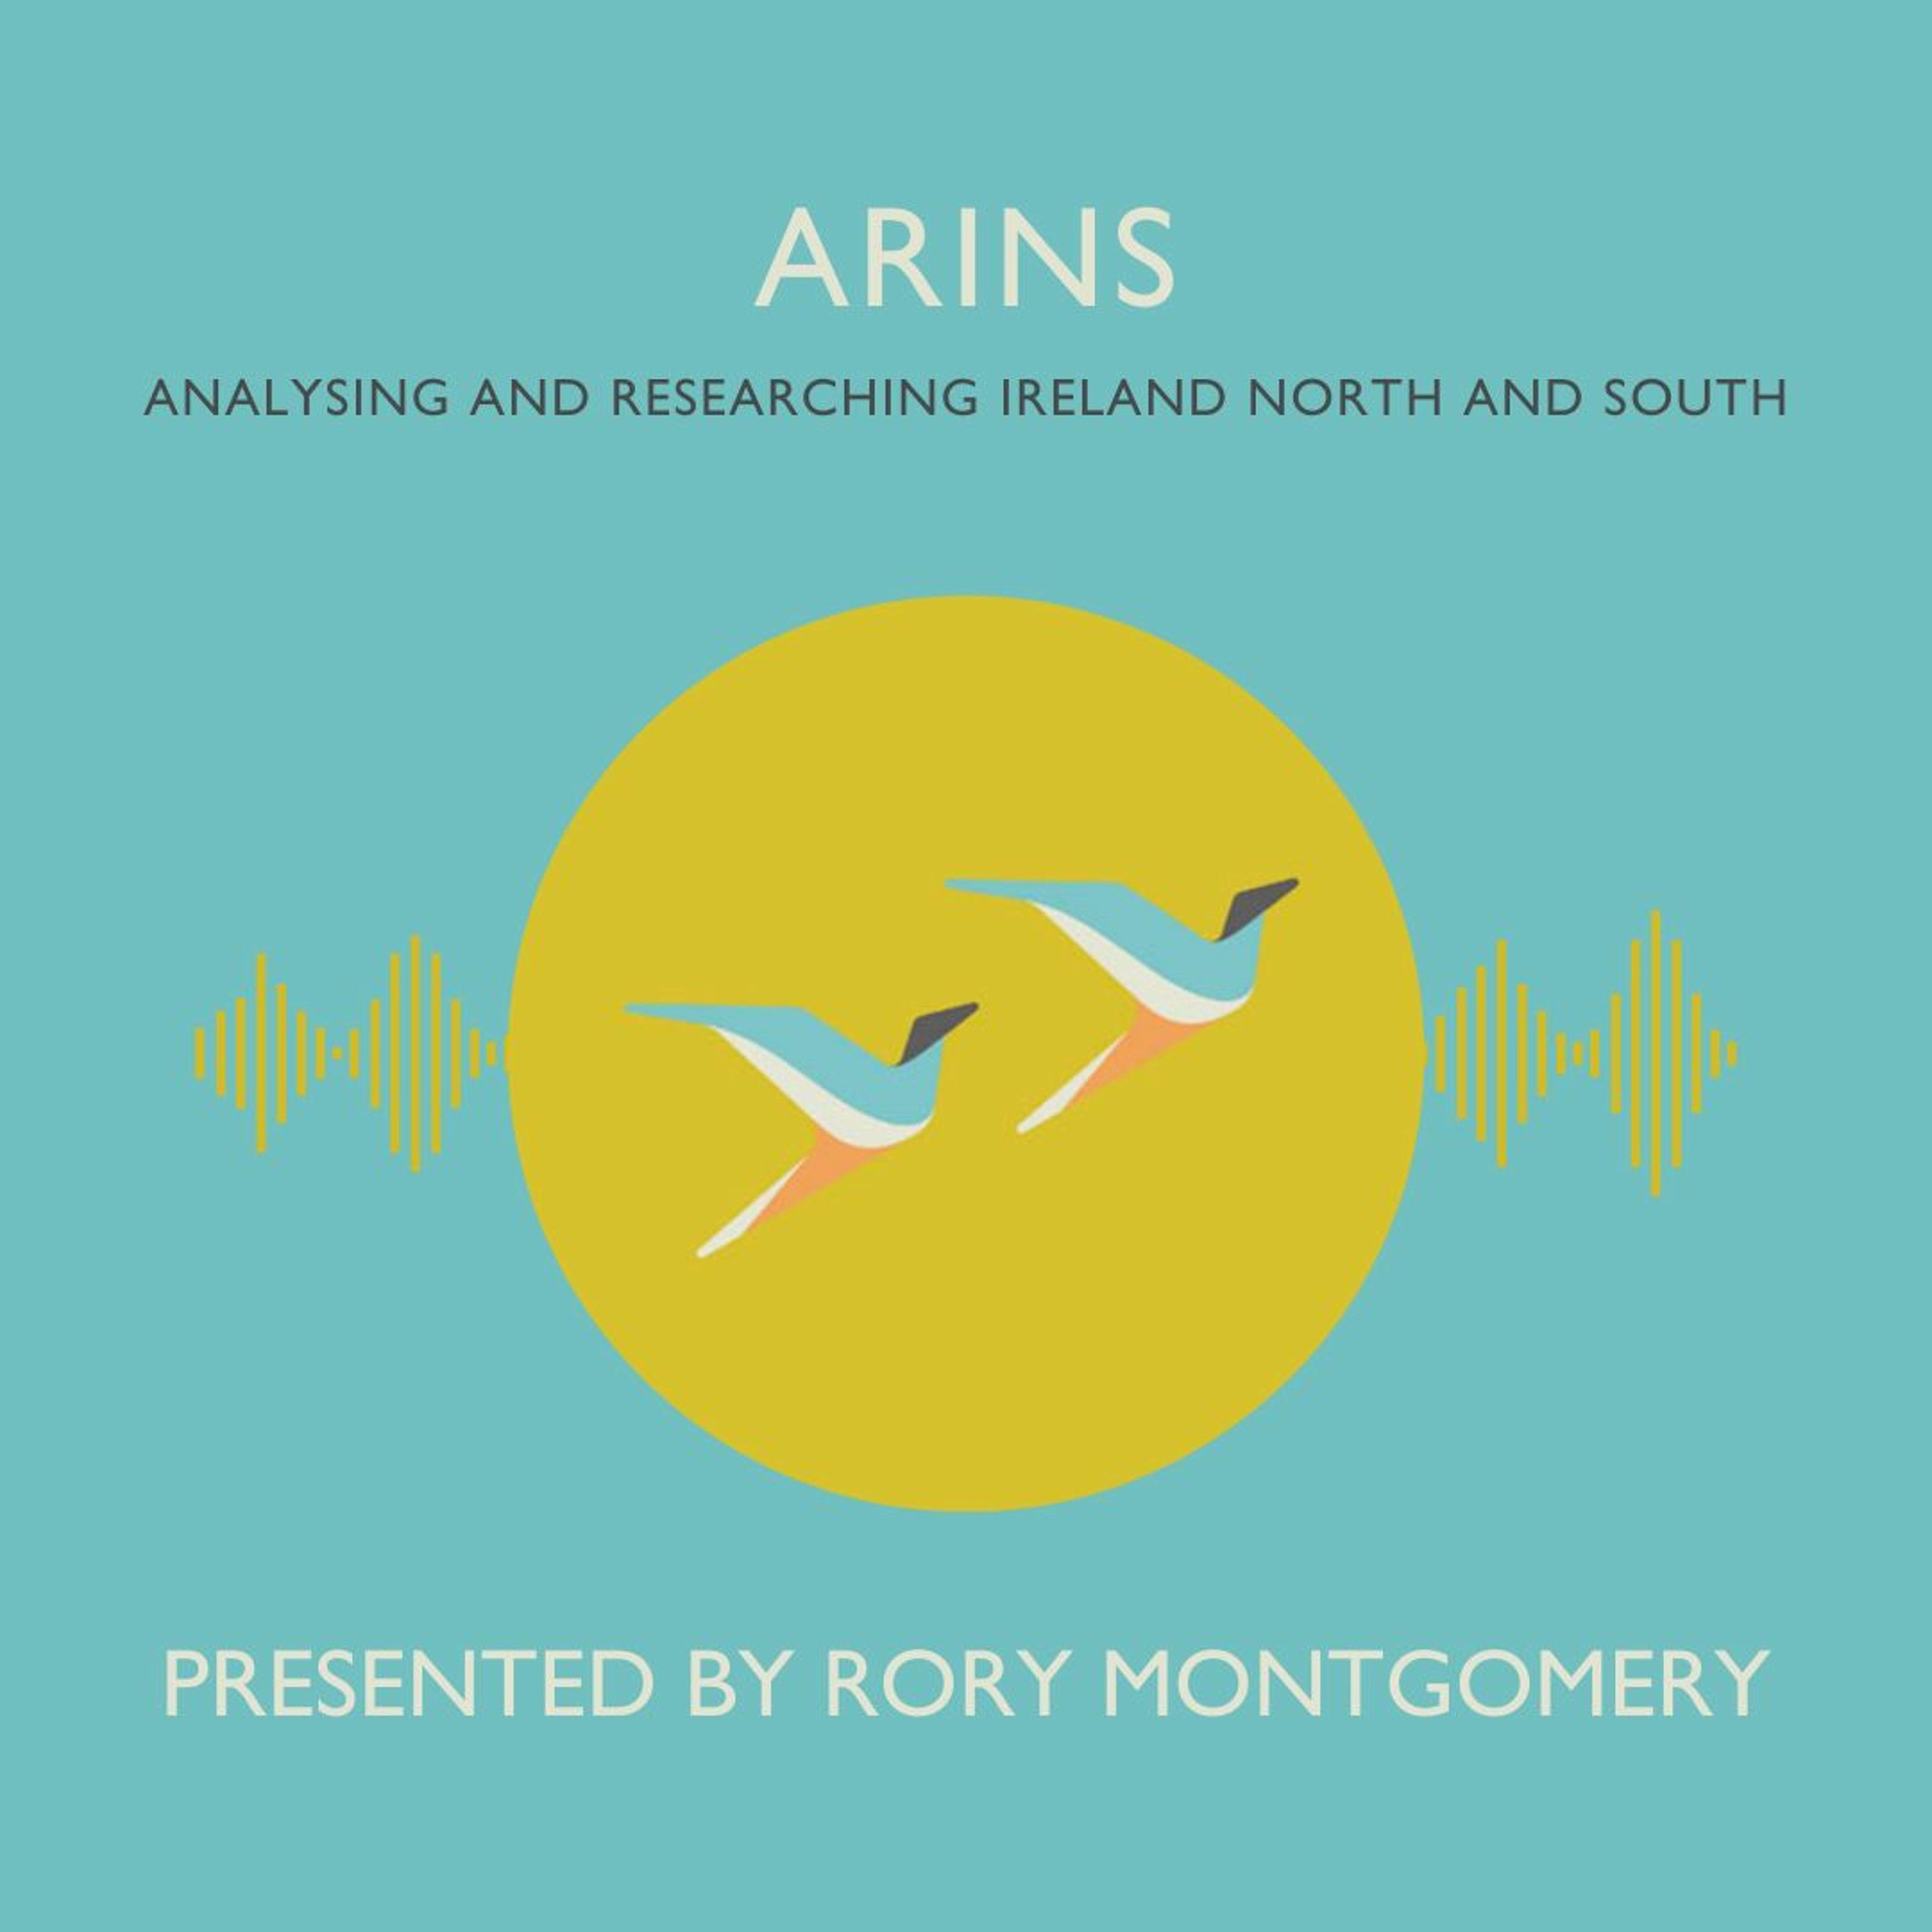 ARINS: An Introduction to the Podcast Series